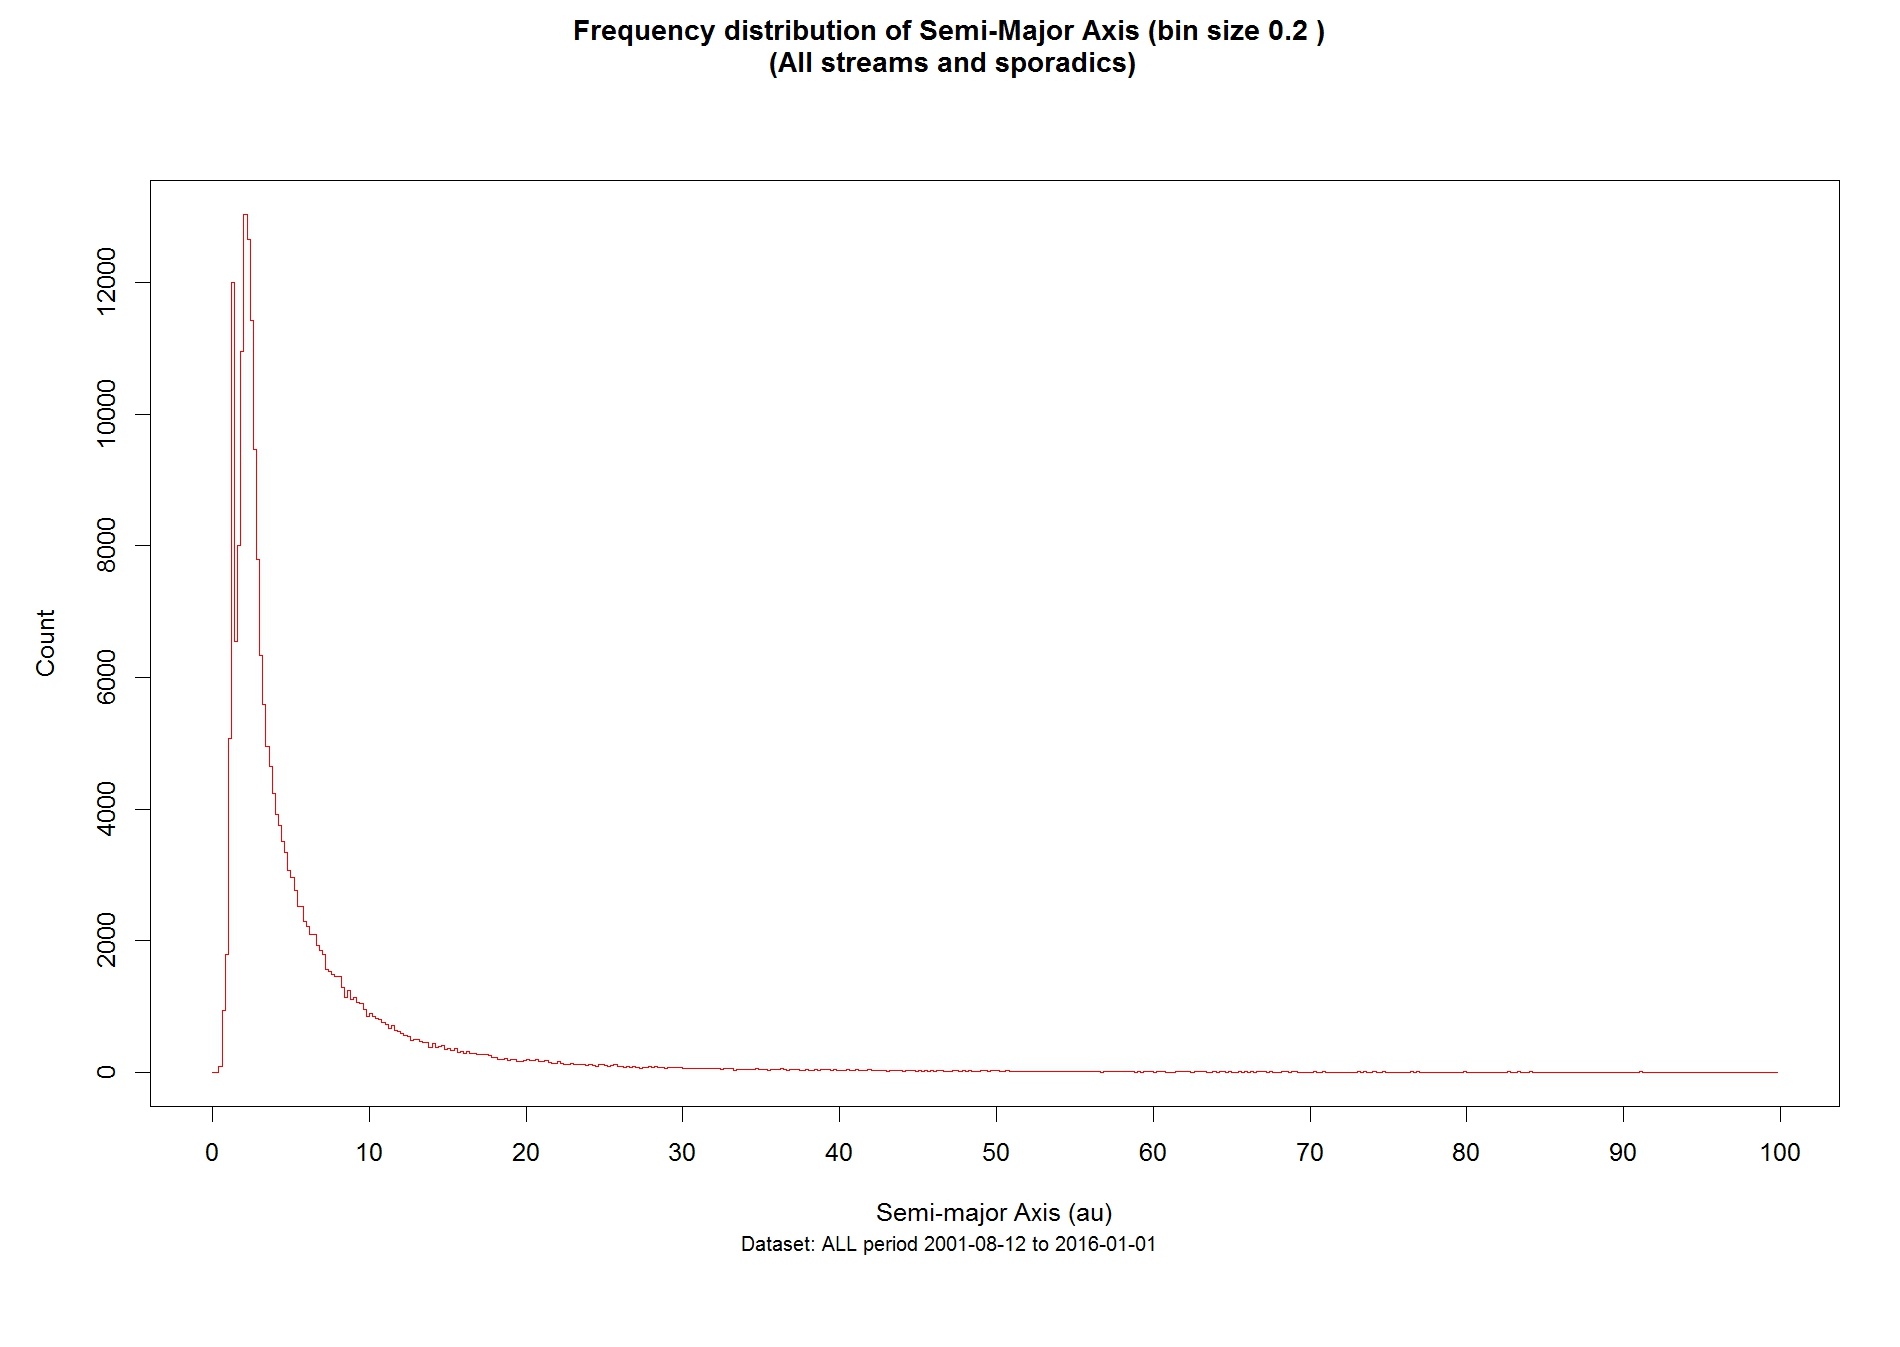 Figure 7: Frequency distribution of semi-major axis (a) with a fixed (configurable) bin size